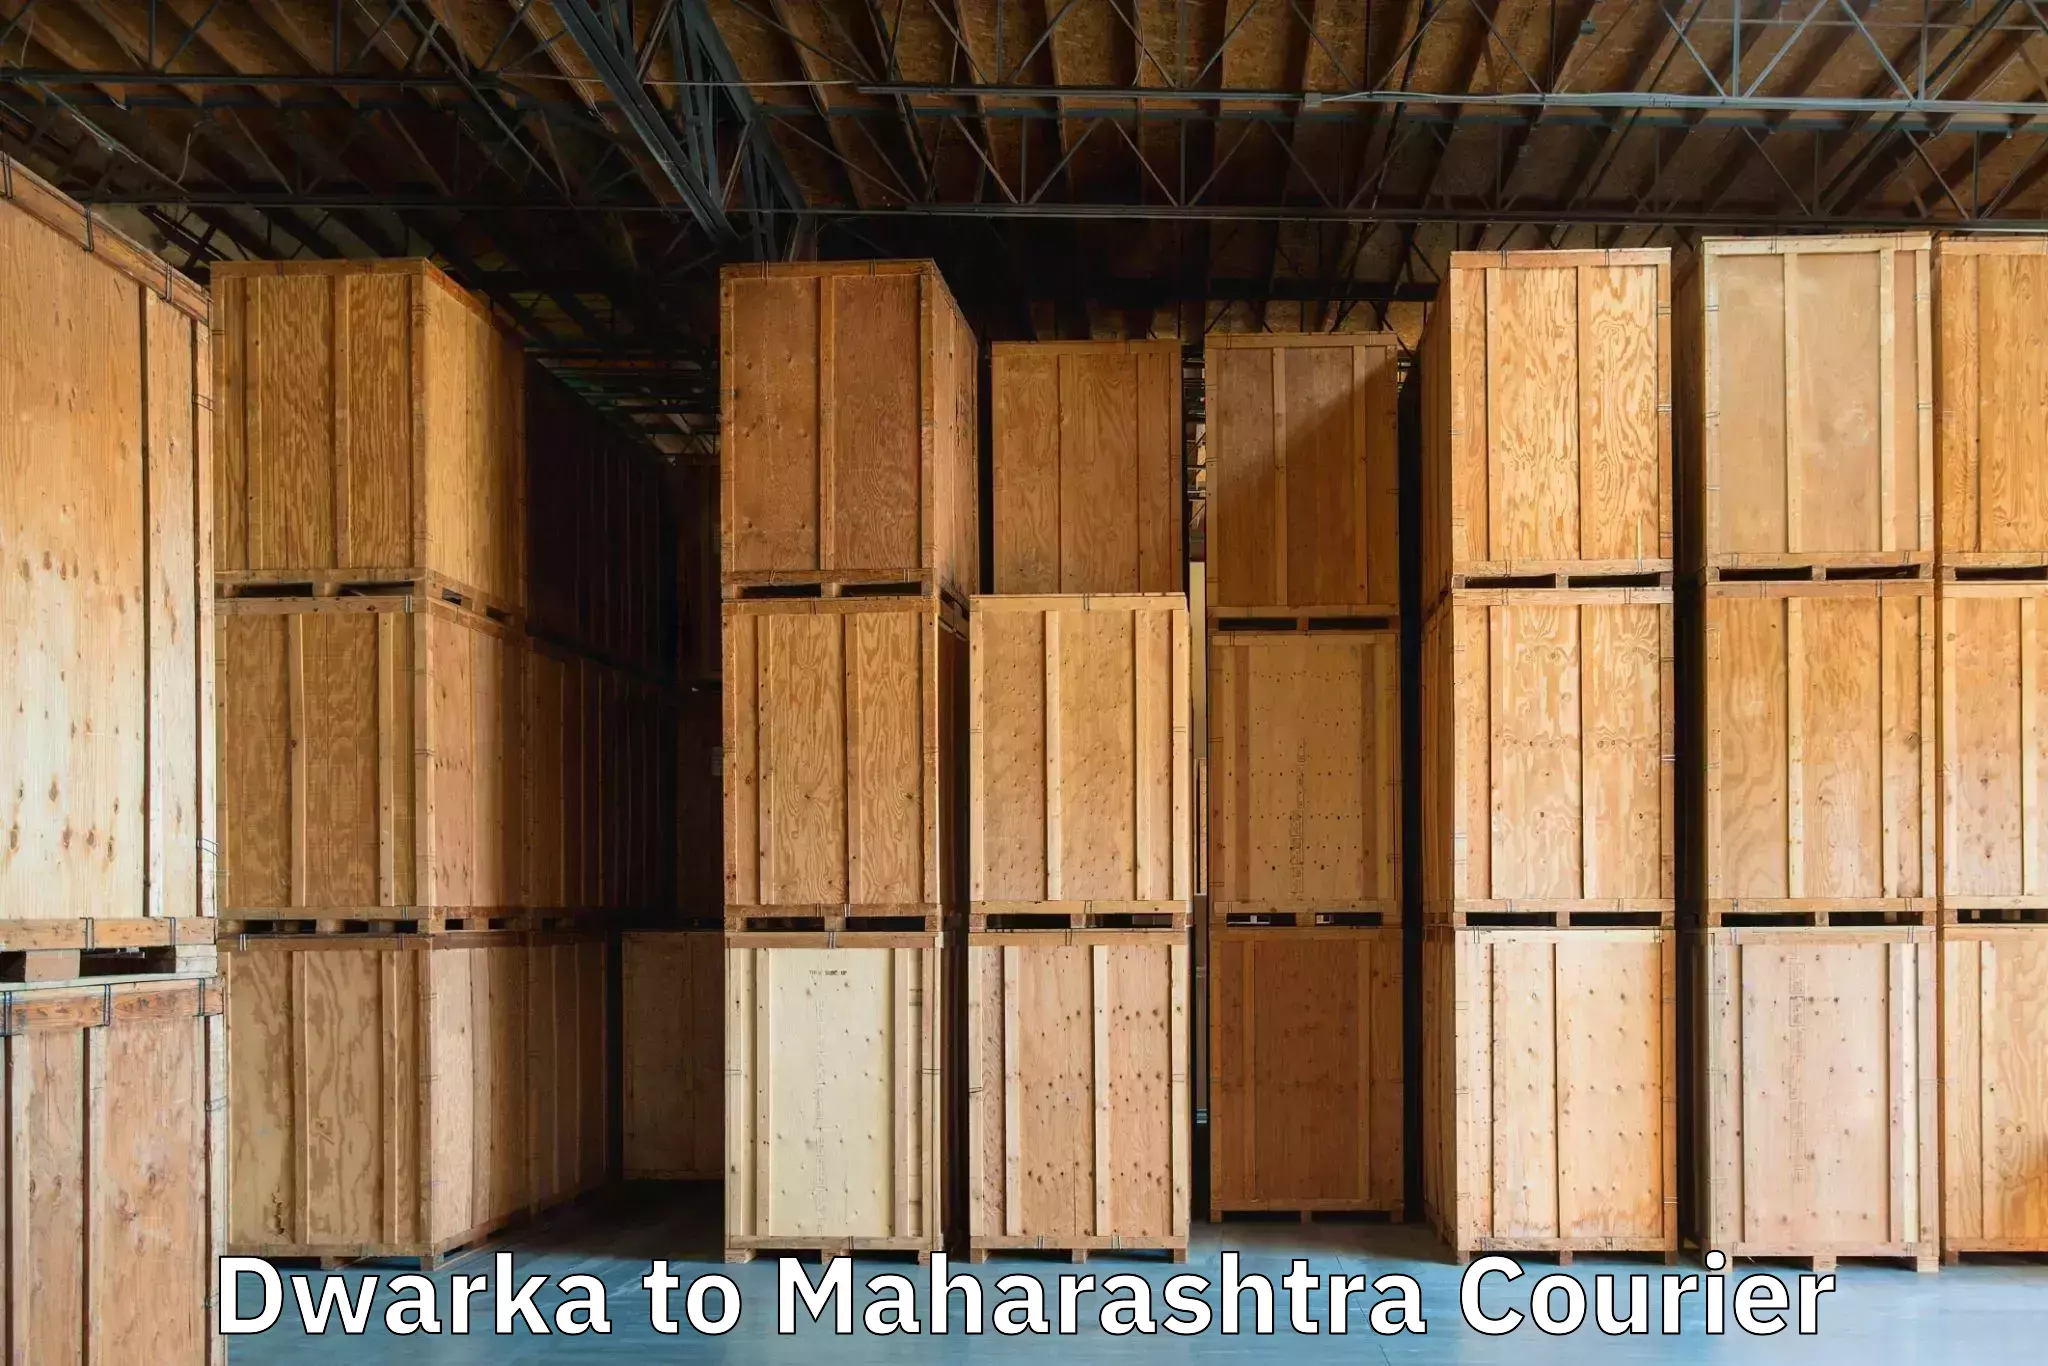 Baggage shipping experience in Dwarka to Mahad